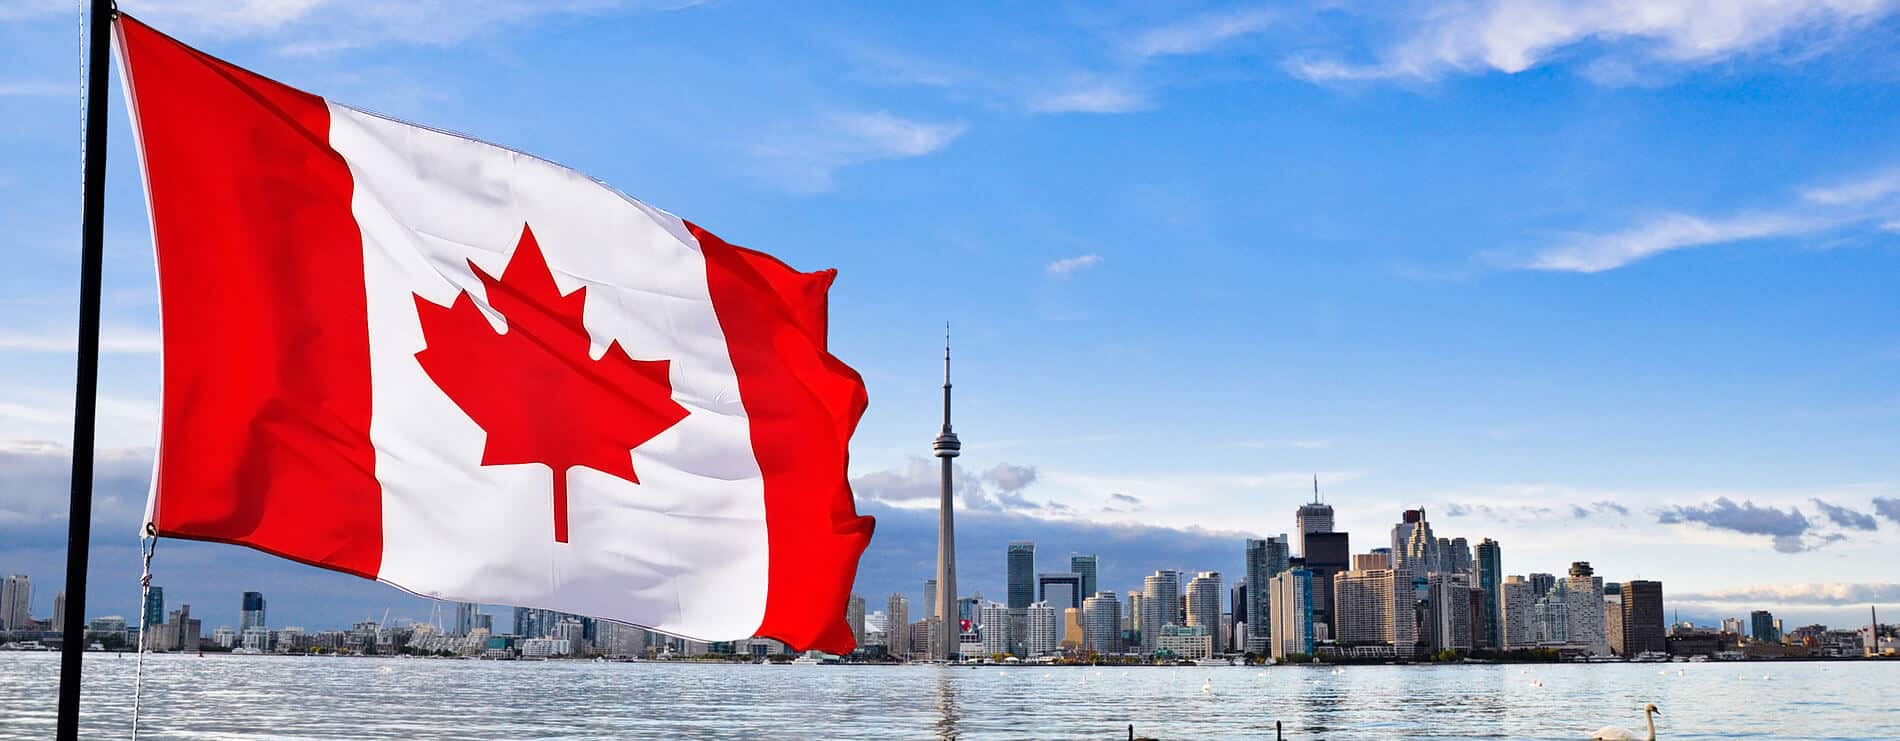 Close-up of flapping Canadian flag with Toronto skyline in background